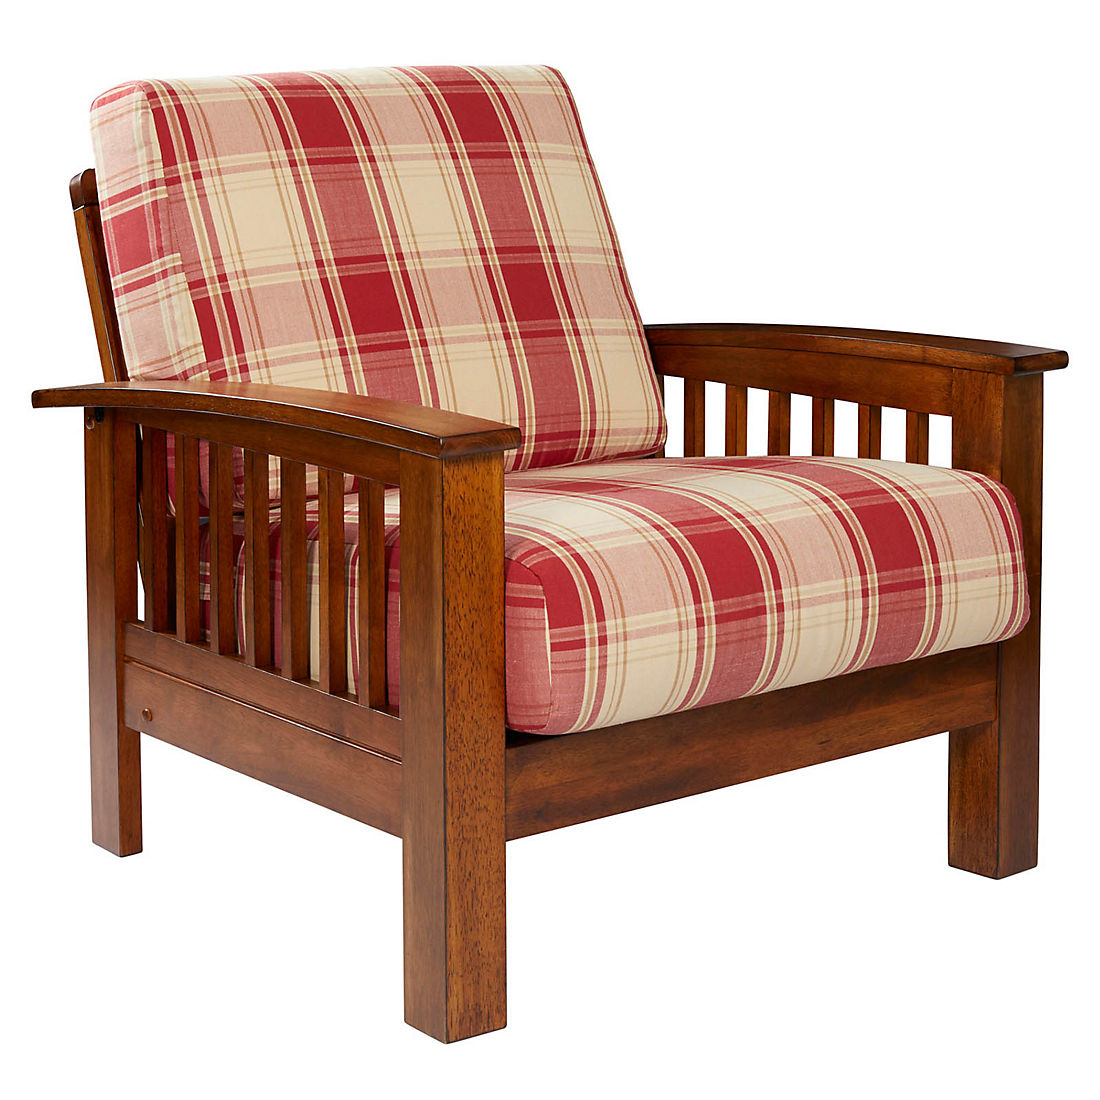 Handy Living Omaha Mission Style Arm Chair Red Plaid Bjs Wholesale Club